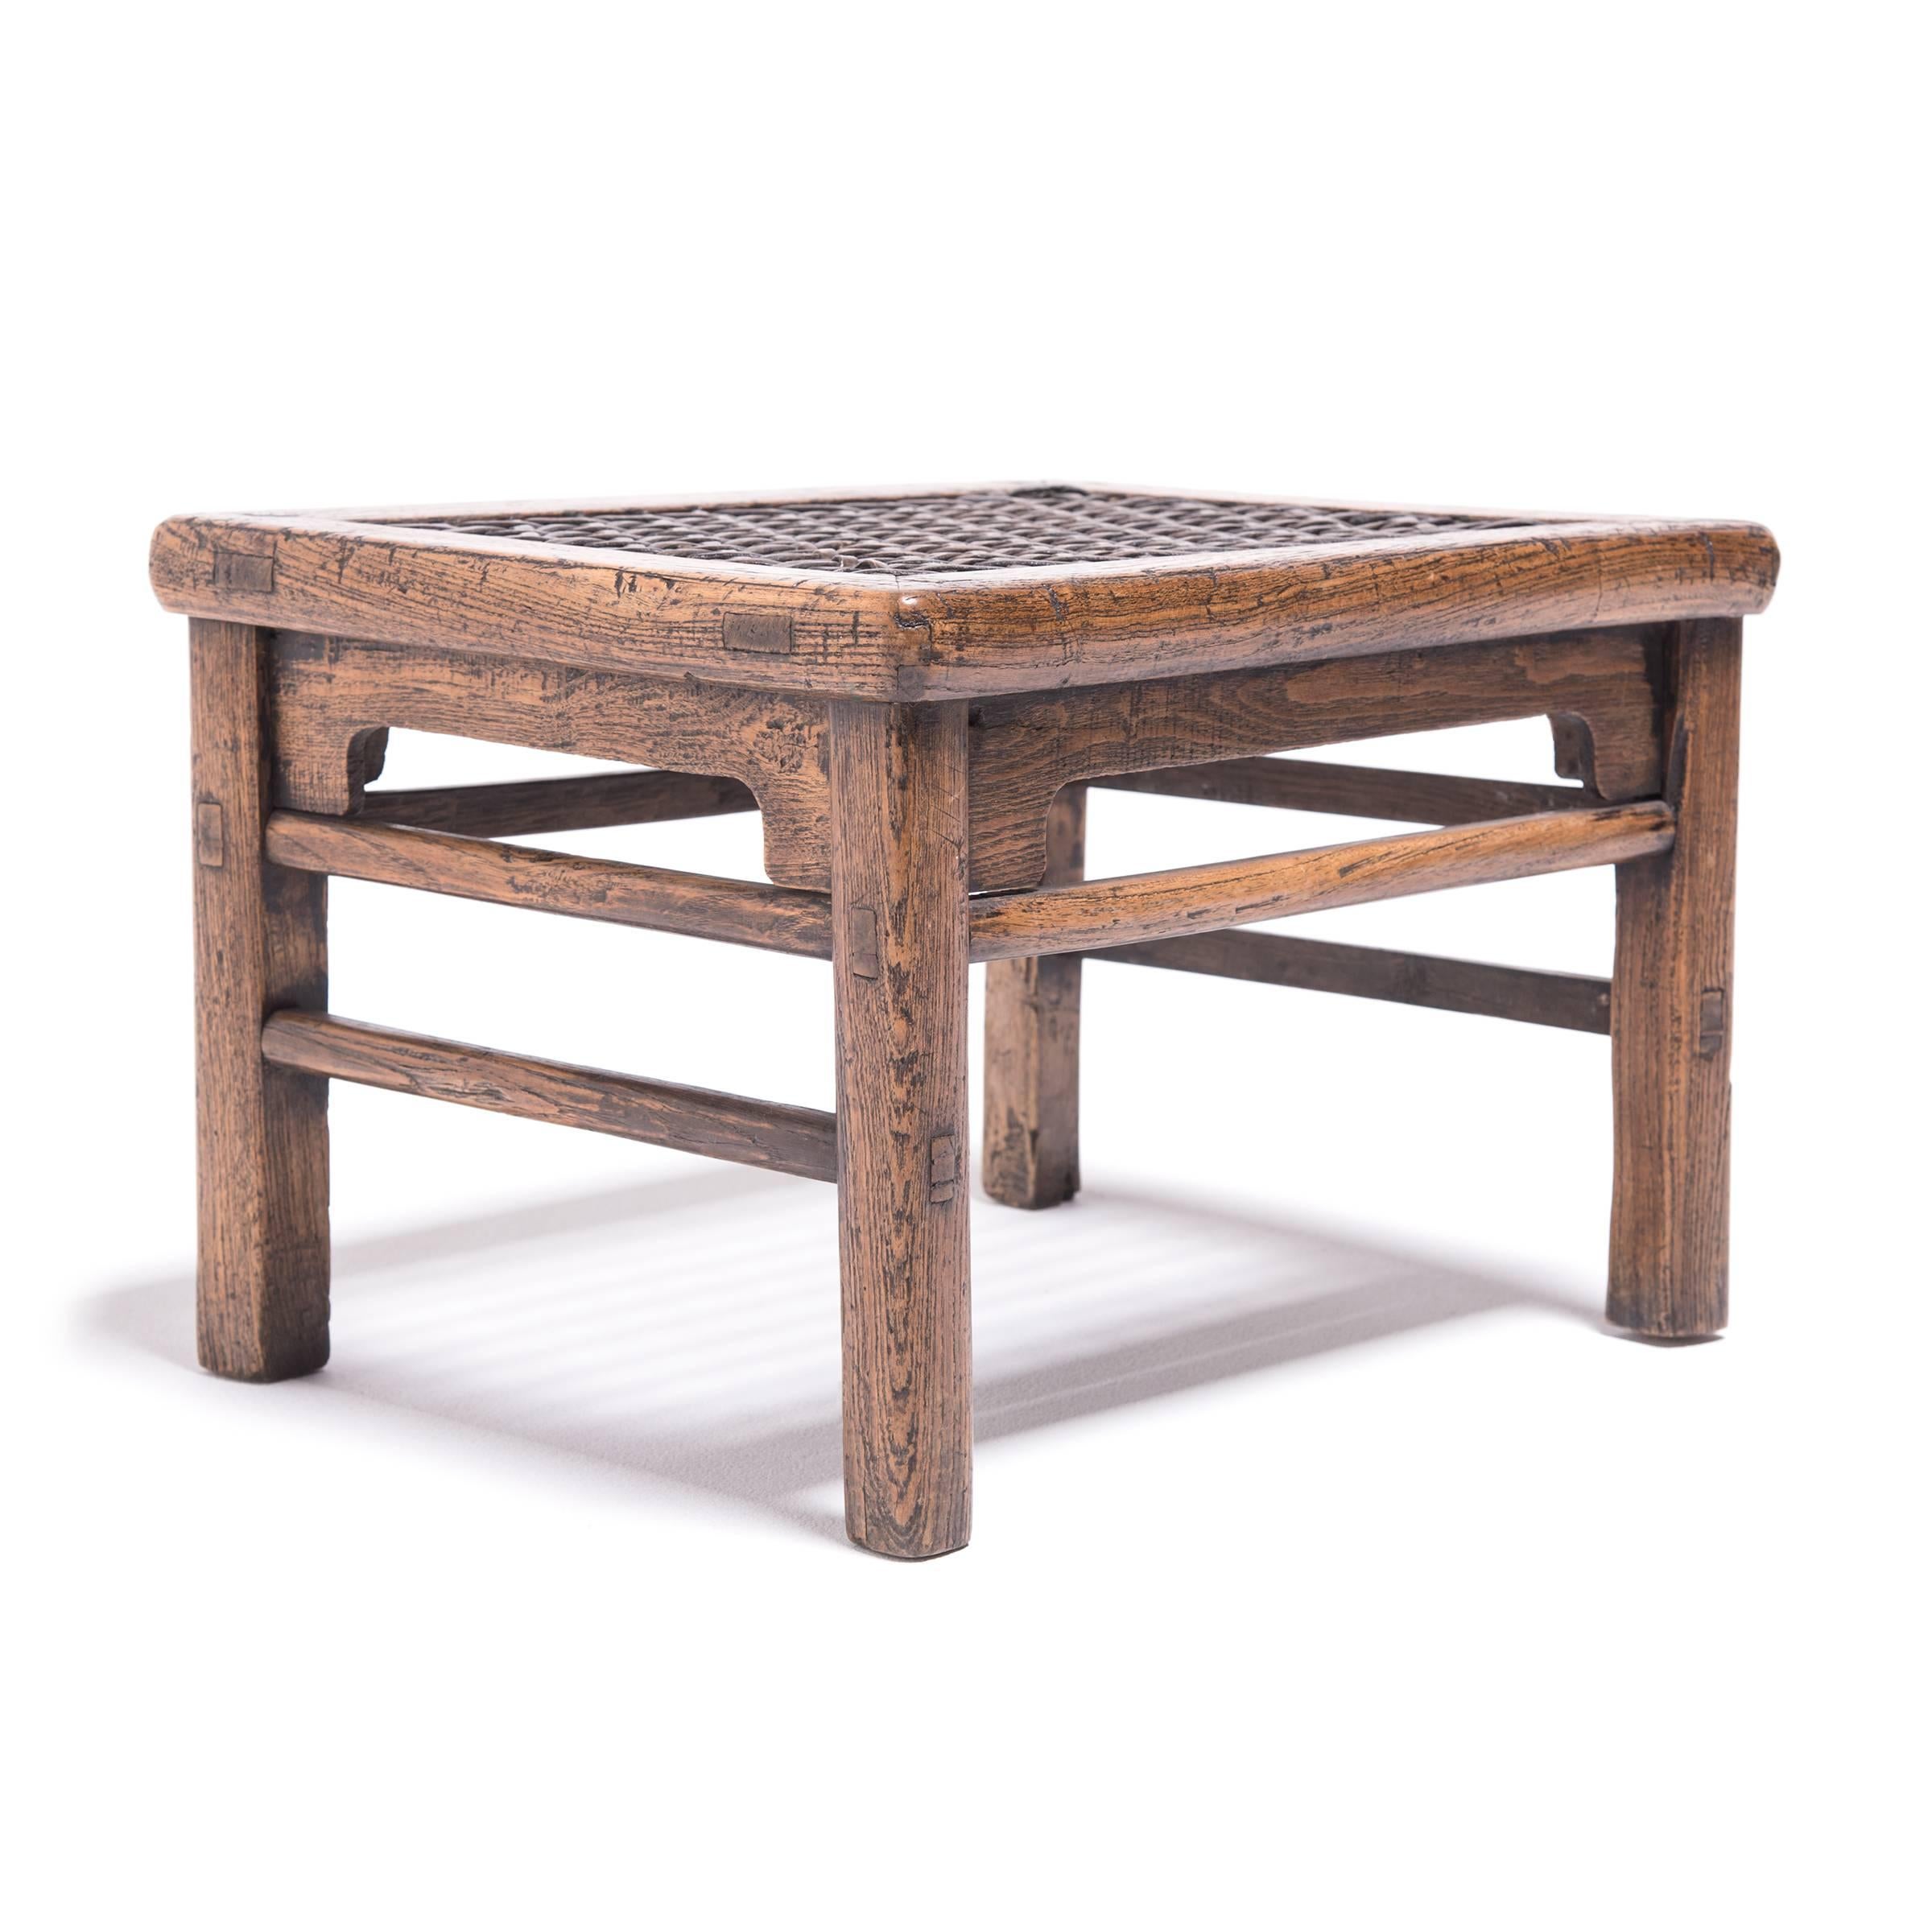 Hand-Woven 19th Century Chinese Low Stool with Woven Hide Top